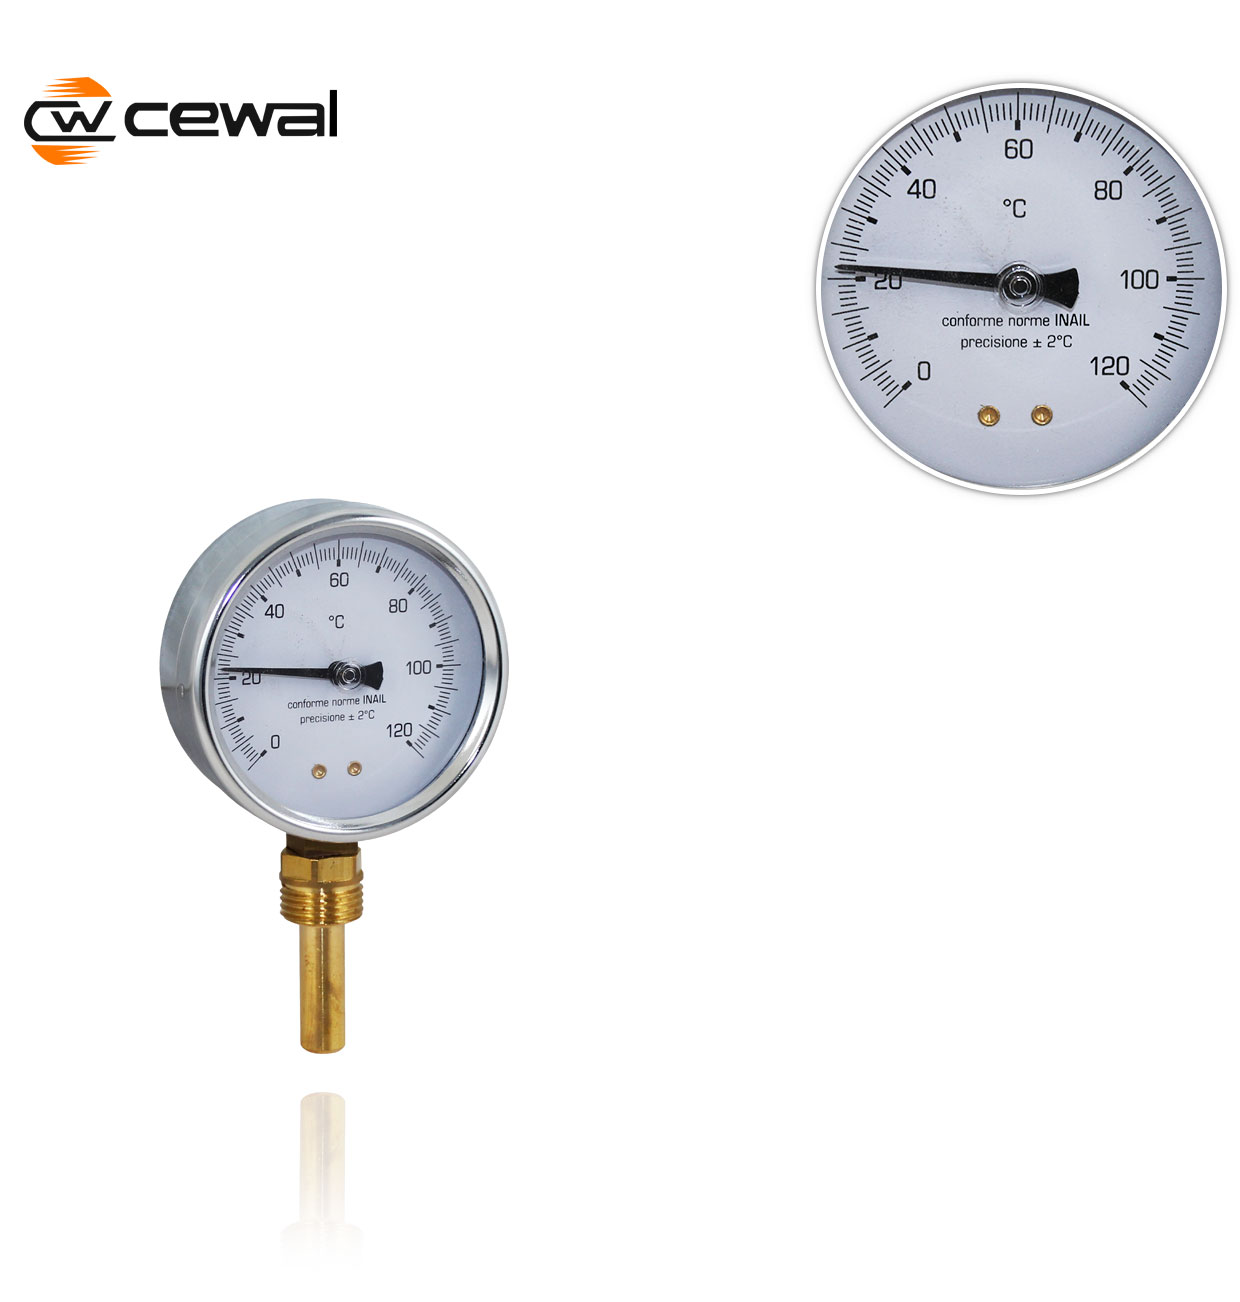 0-120ºC D80 5cm RADIAL STAINLESS STEEL BIMETAL THERMOMETER